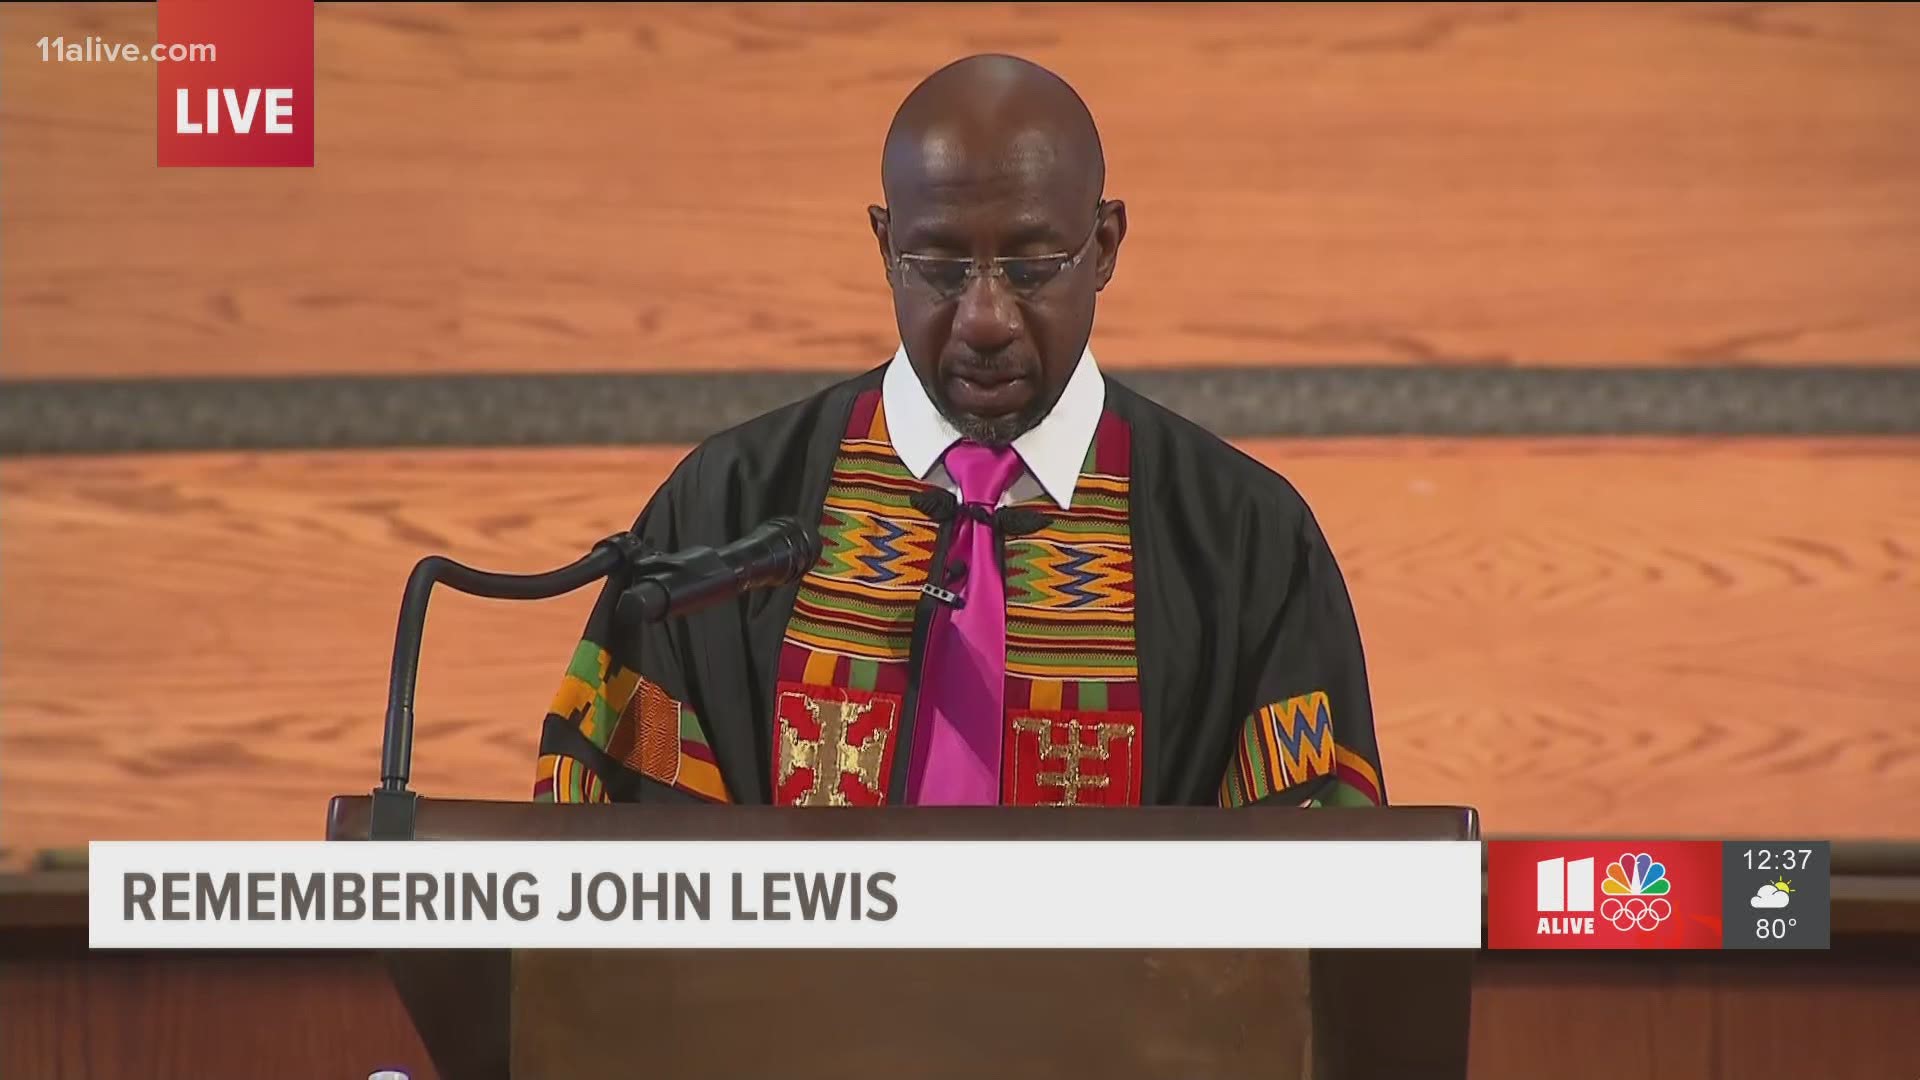 Rev. Raphael Warnock read the touching letter from the oldest living president.